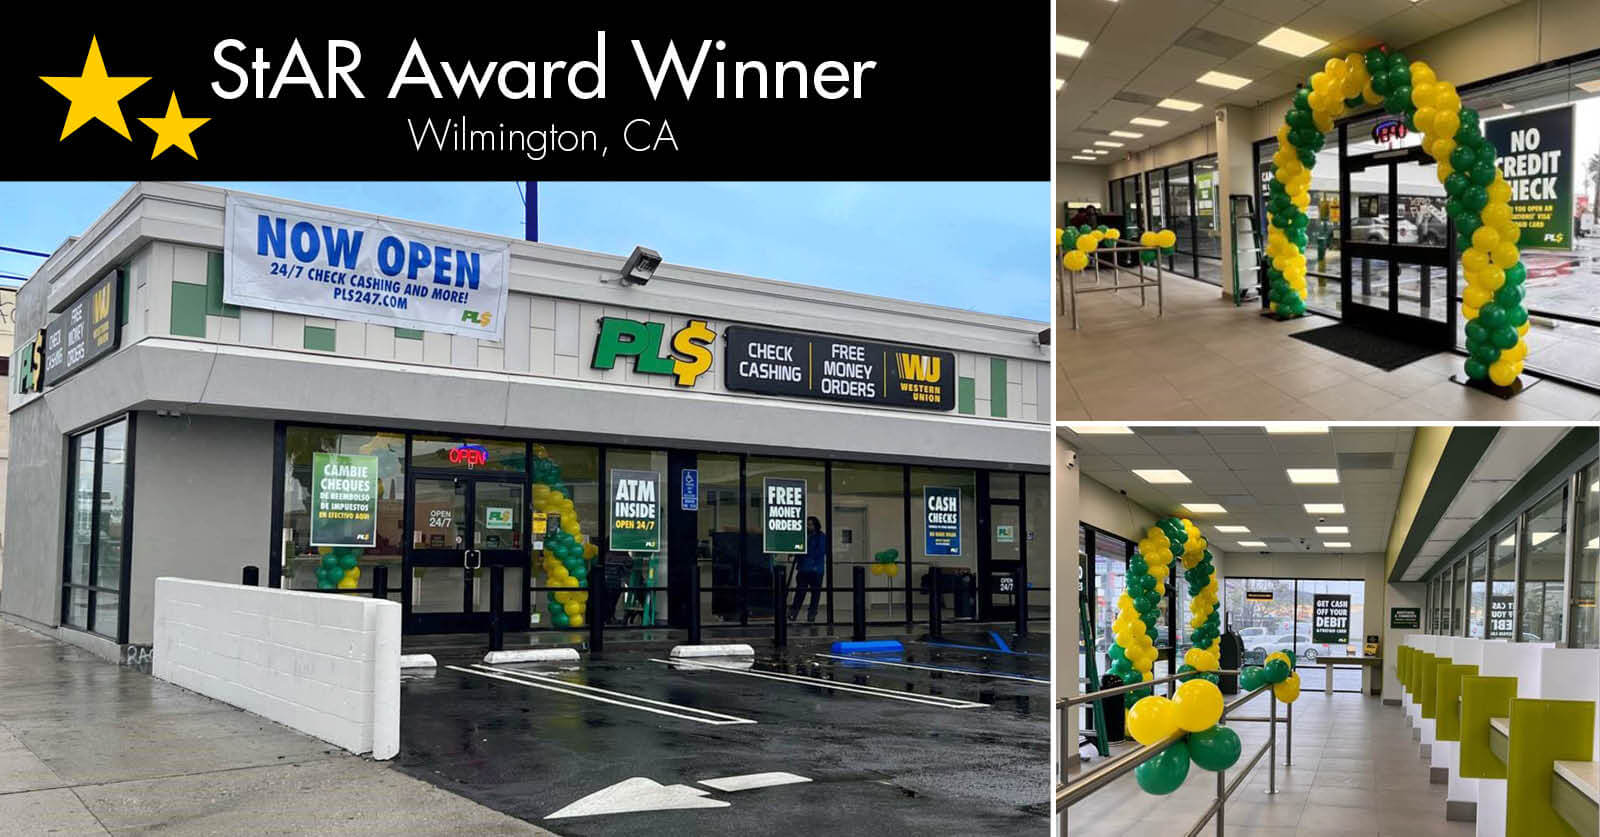 PLS Receives StAR Award from INFiN for its Store Appearance Best Practices in Wilmington, California